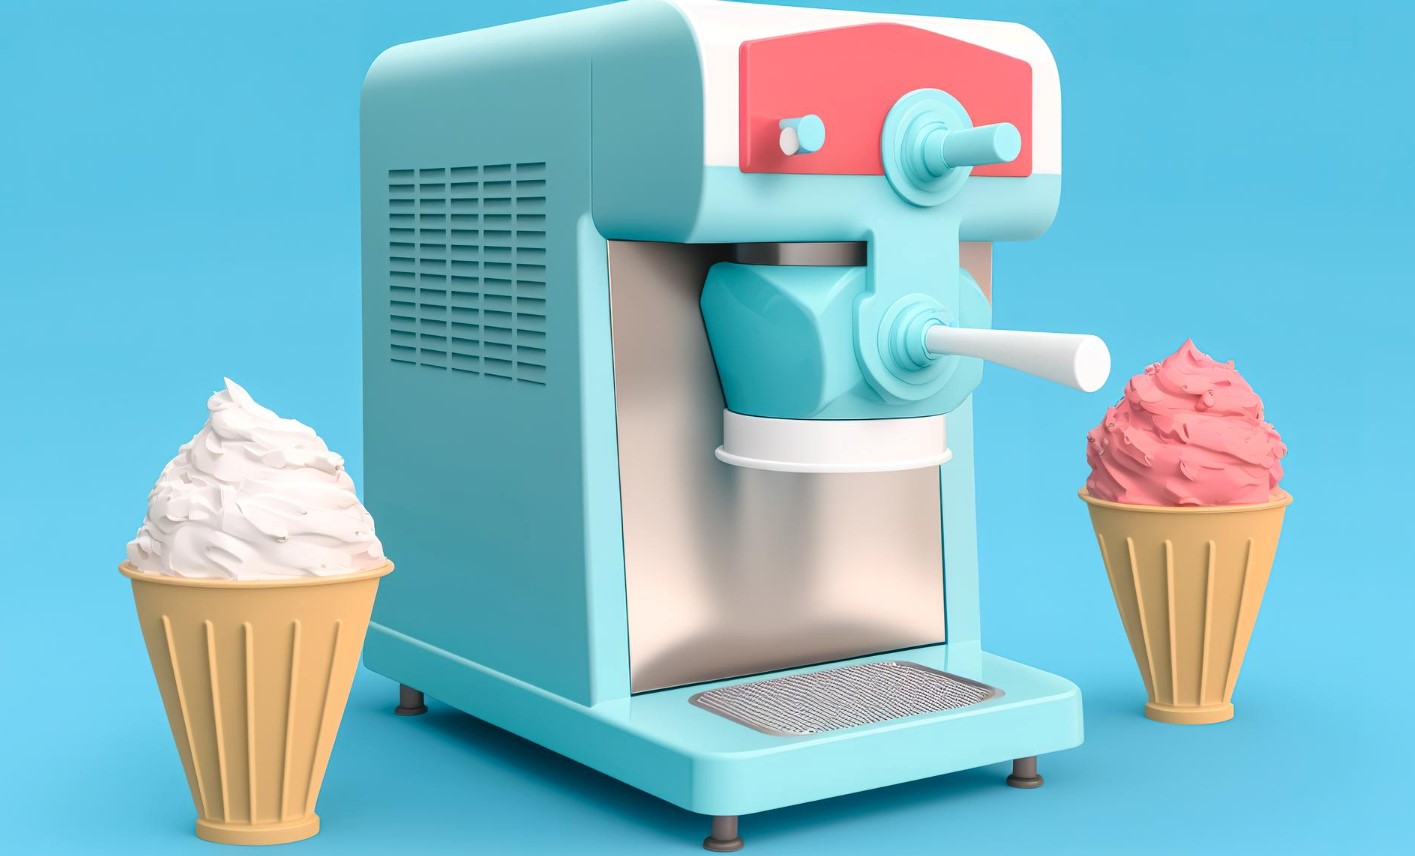 Ice Cream Machine Features: What to Look for Quality Ice Cream?